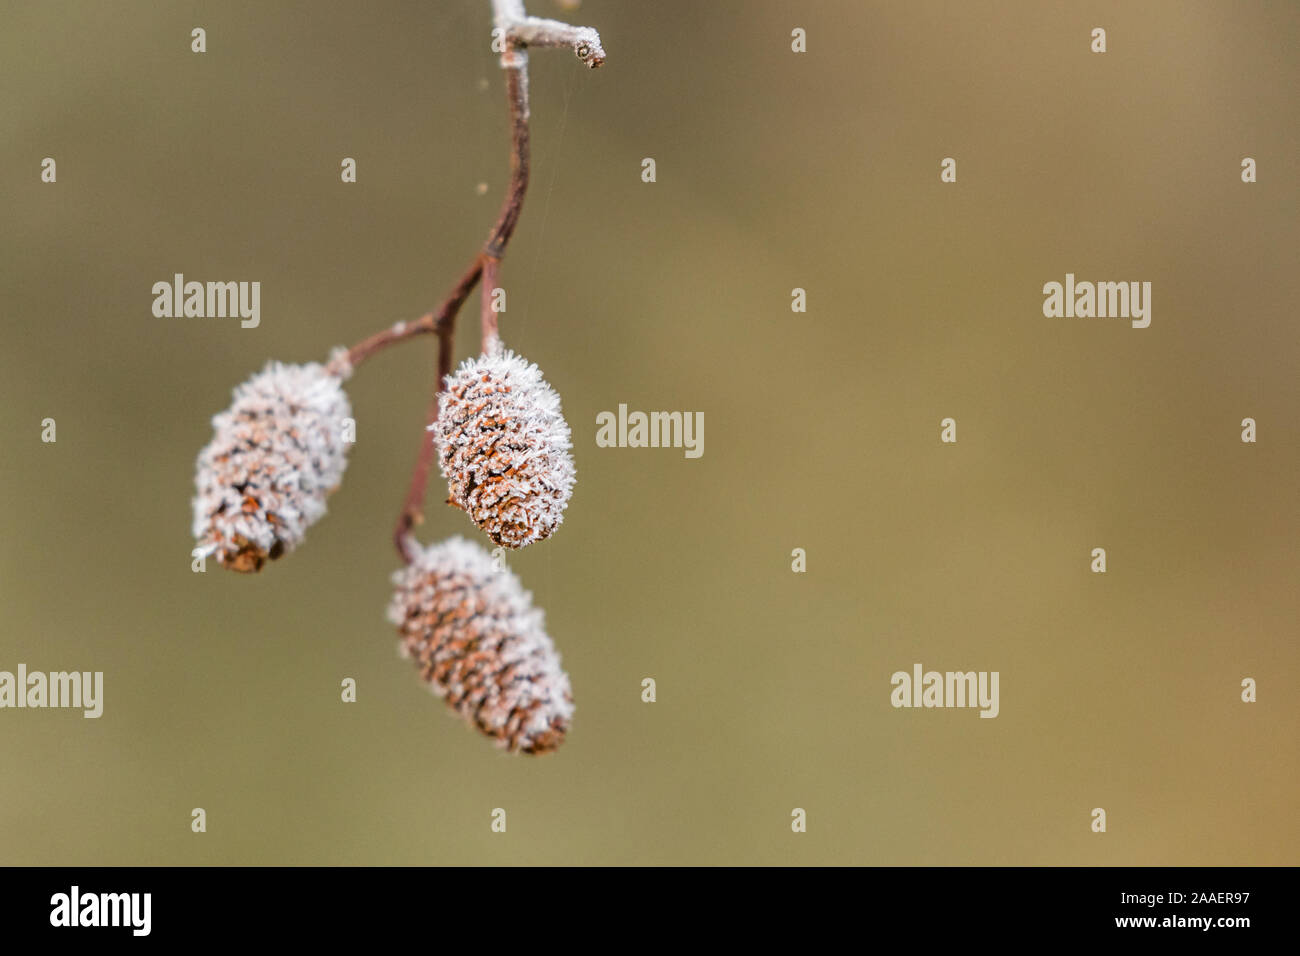 Female Alder Catkins covered in frost with a blank background. Stock Photo